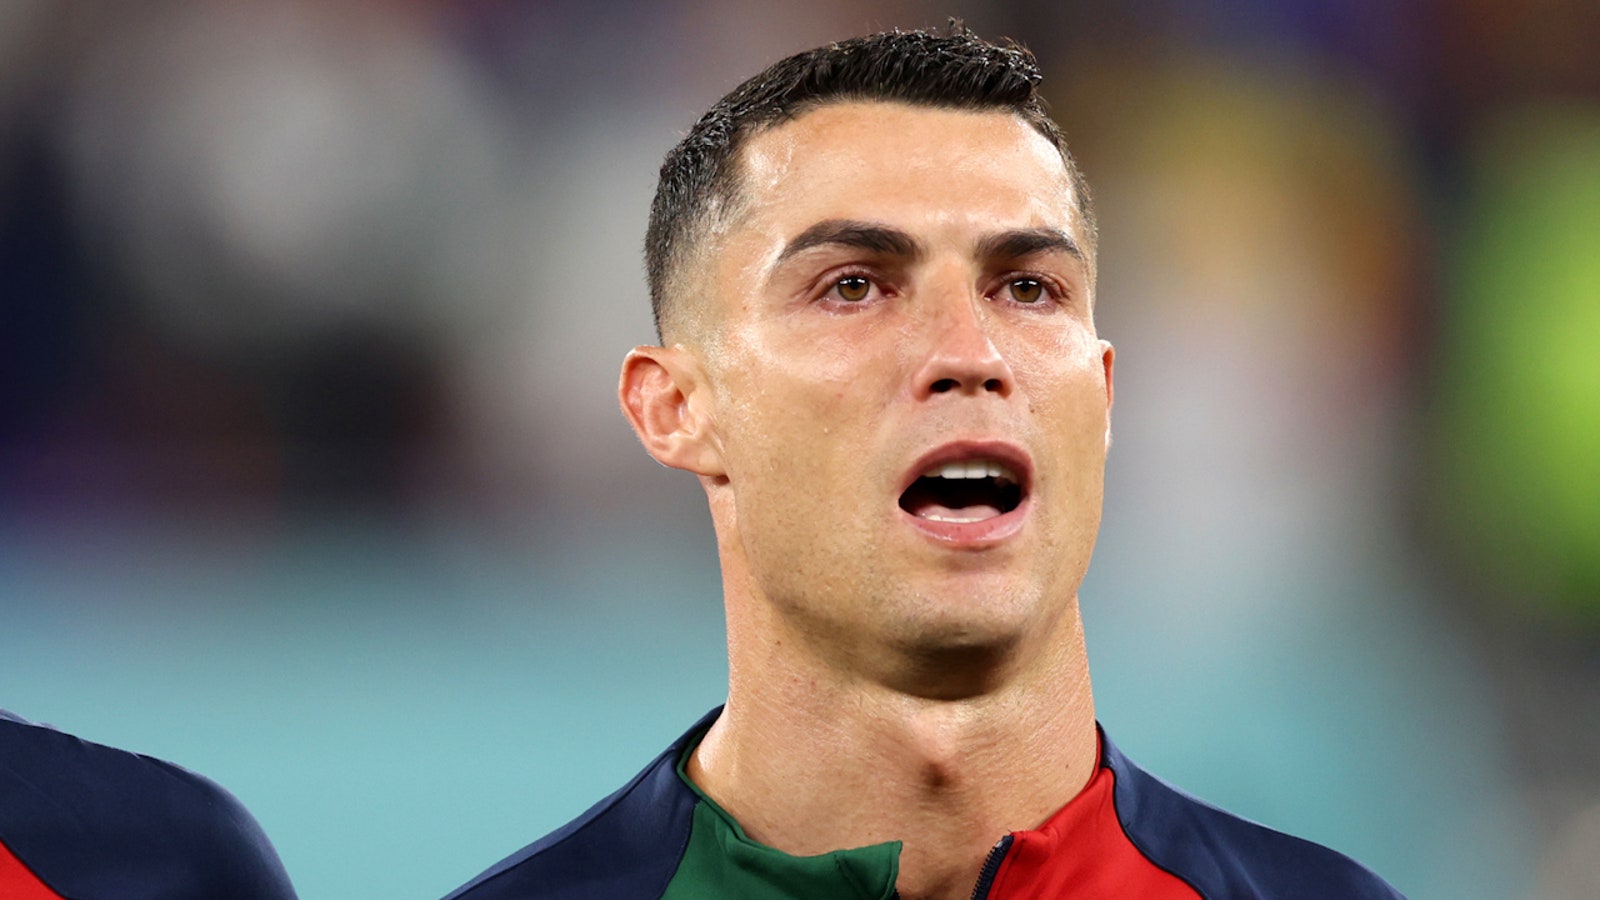 Cristiano Ronaldo breaks down in tears during Portugal's national anthem